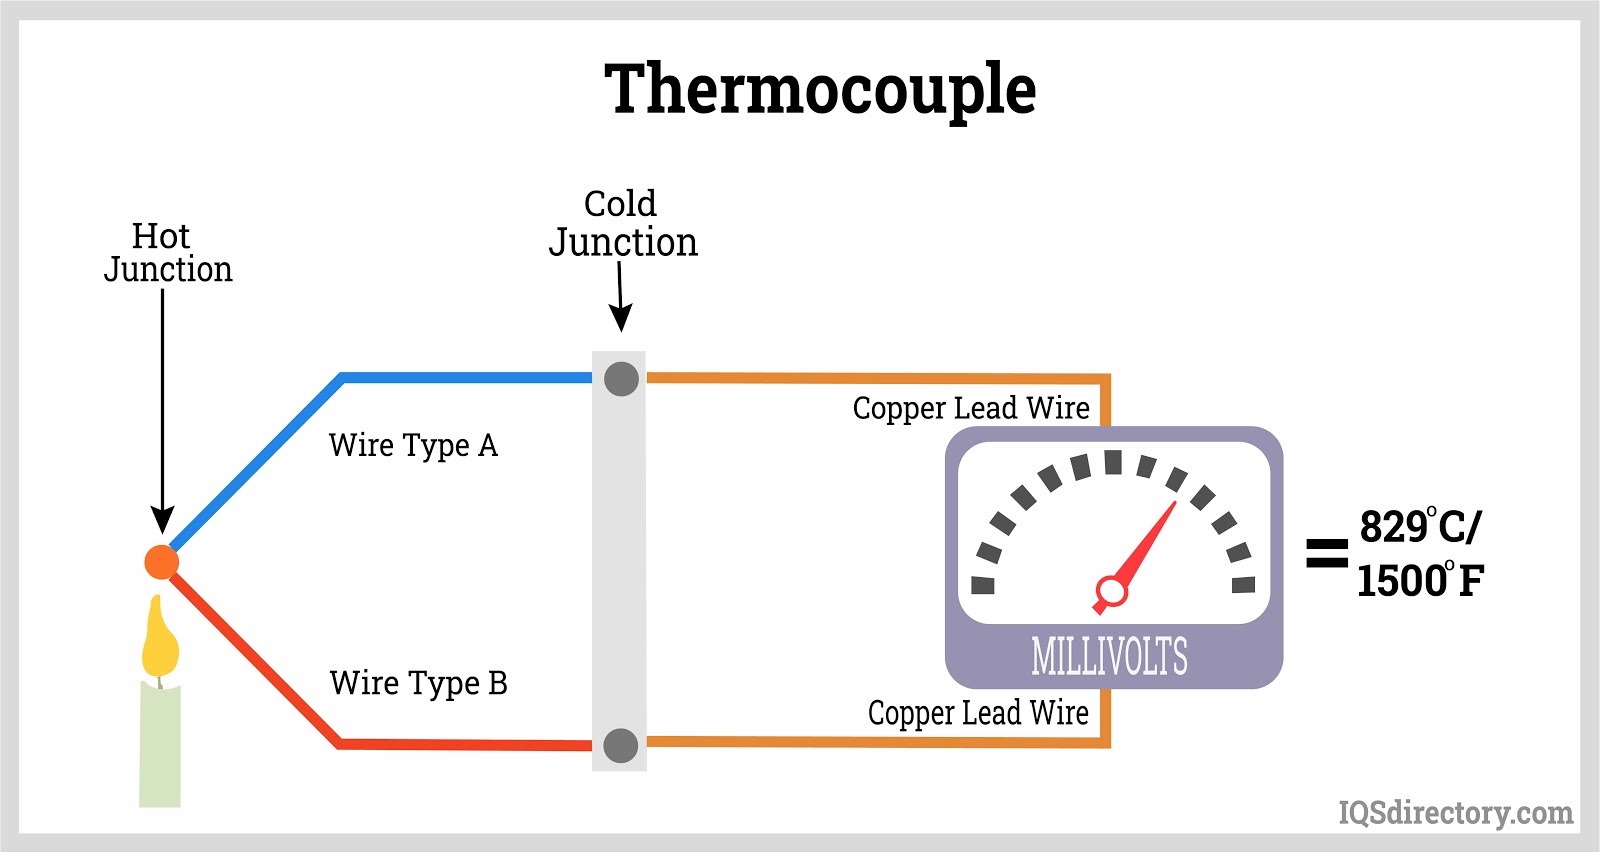 What is a Thermistor, How it Works, and What Does it Do? - Wattco